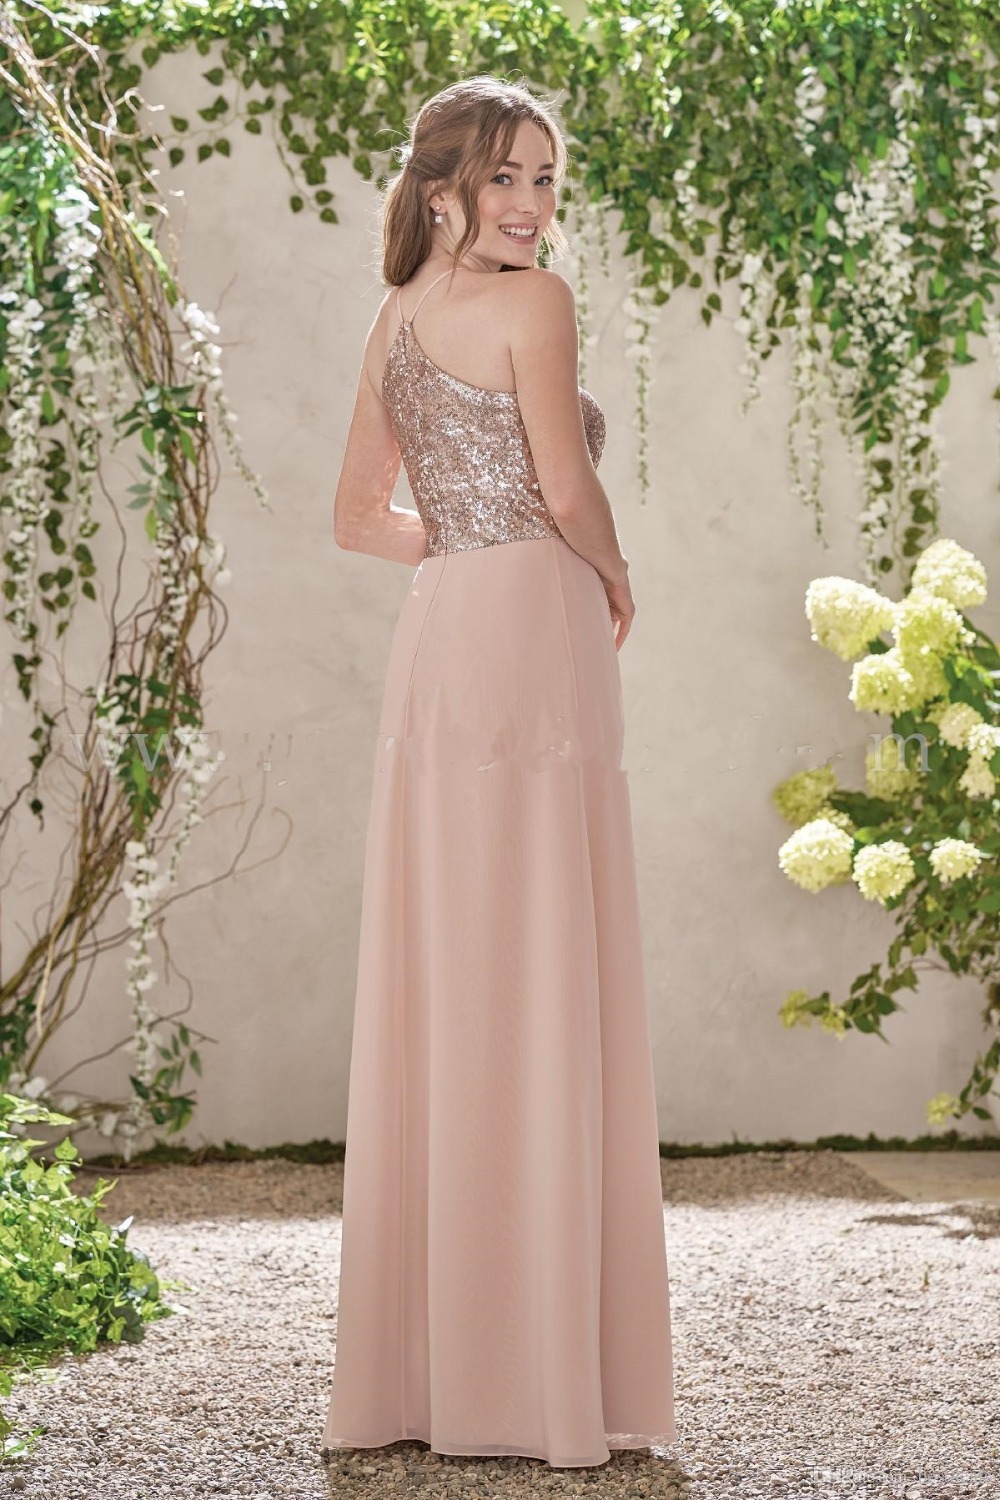 2017-new-rose-gold-bridesmaid-dresses-a-line-spaghetti-backless-sequins-chiffon-cheap-long-beach-wedding-gust-dress-maid-of-honor-gowns (2)